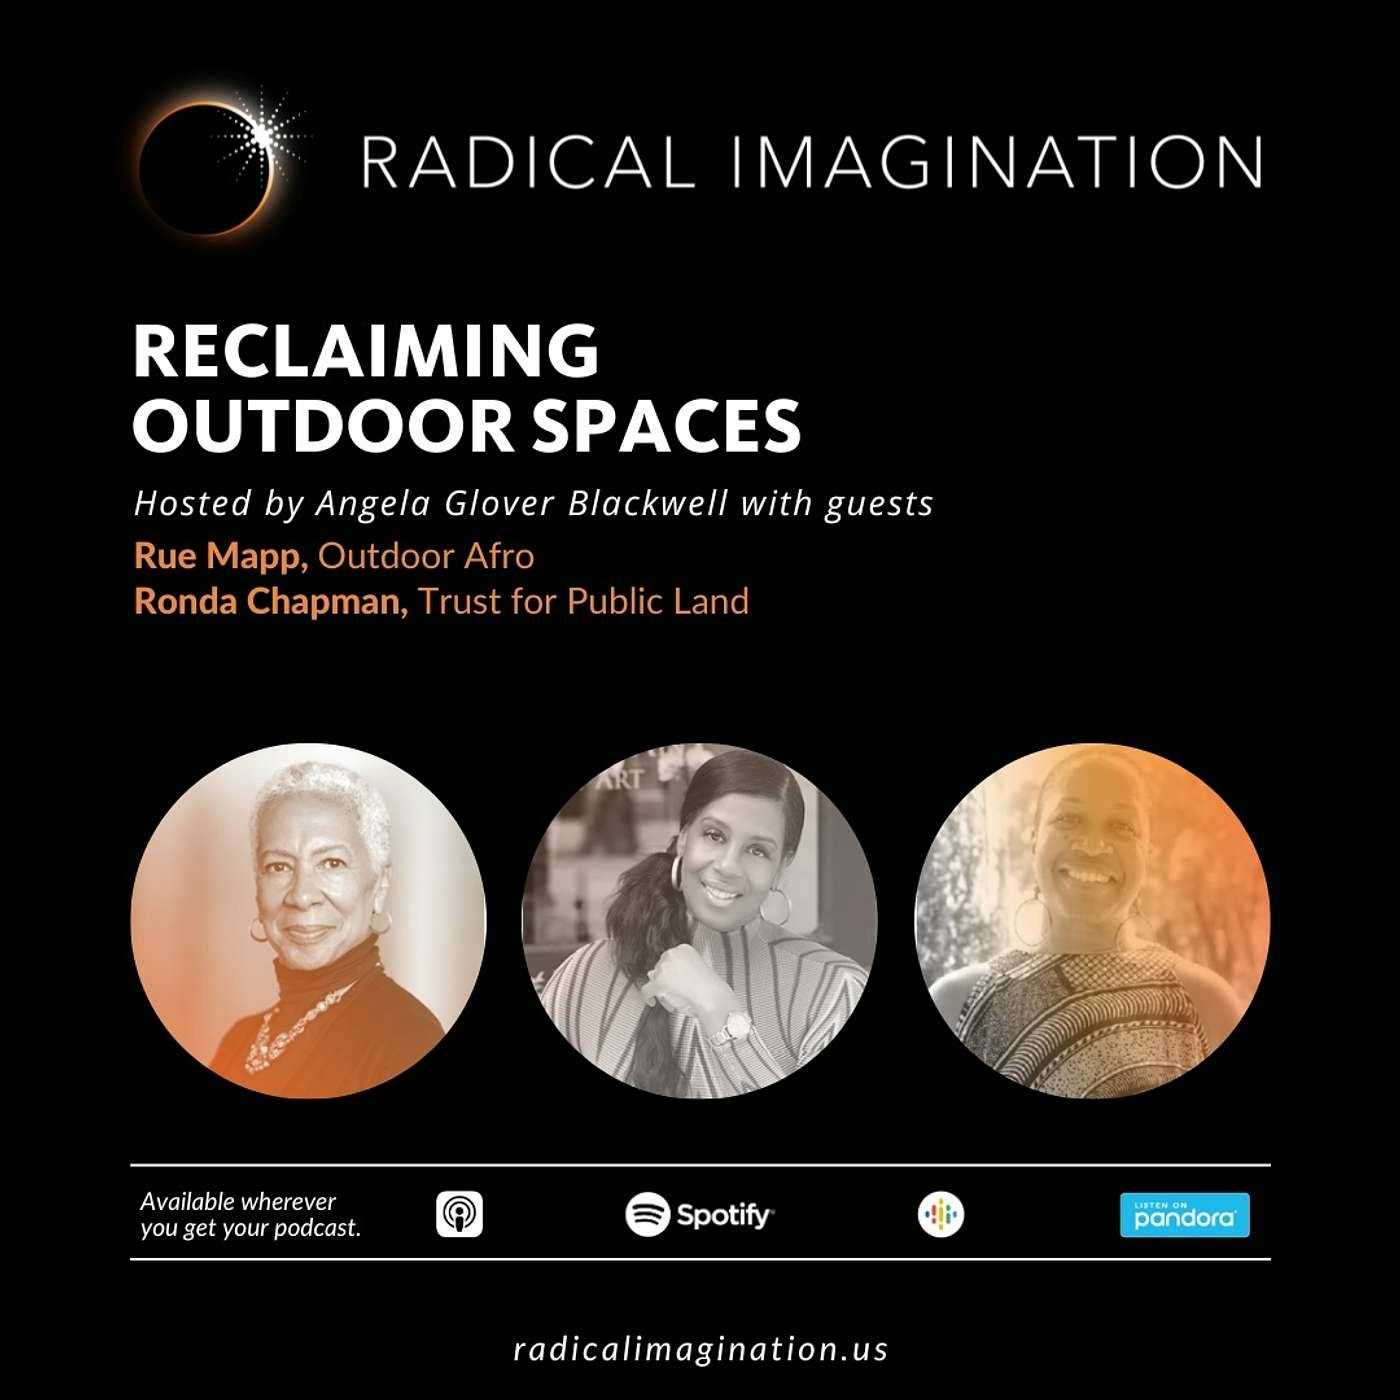 Reclaiming Outdoor Spaces